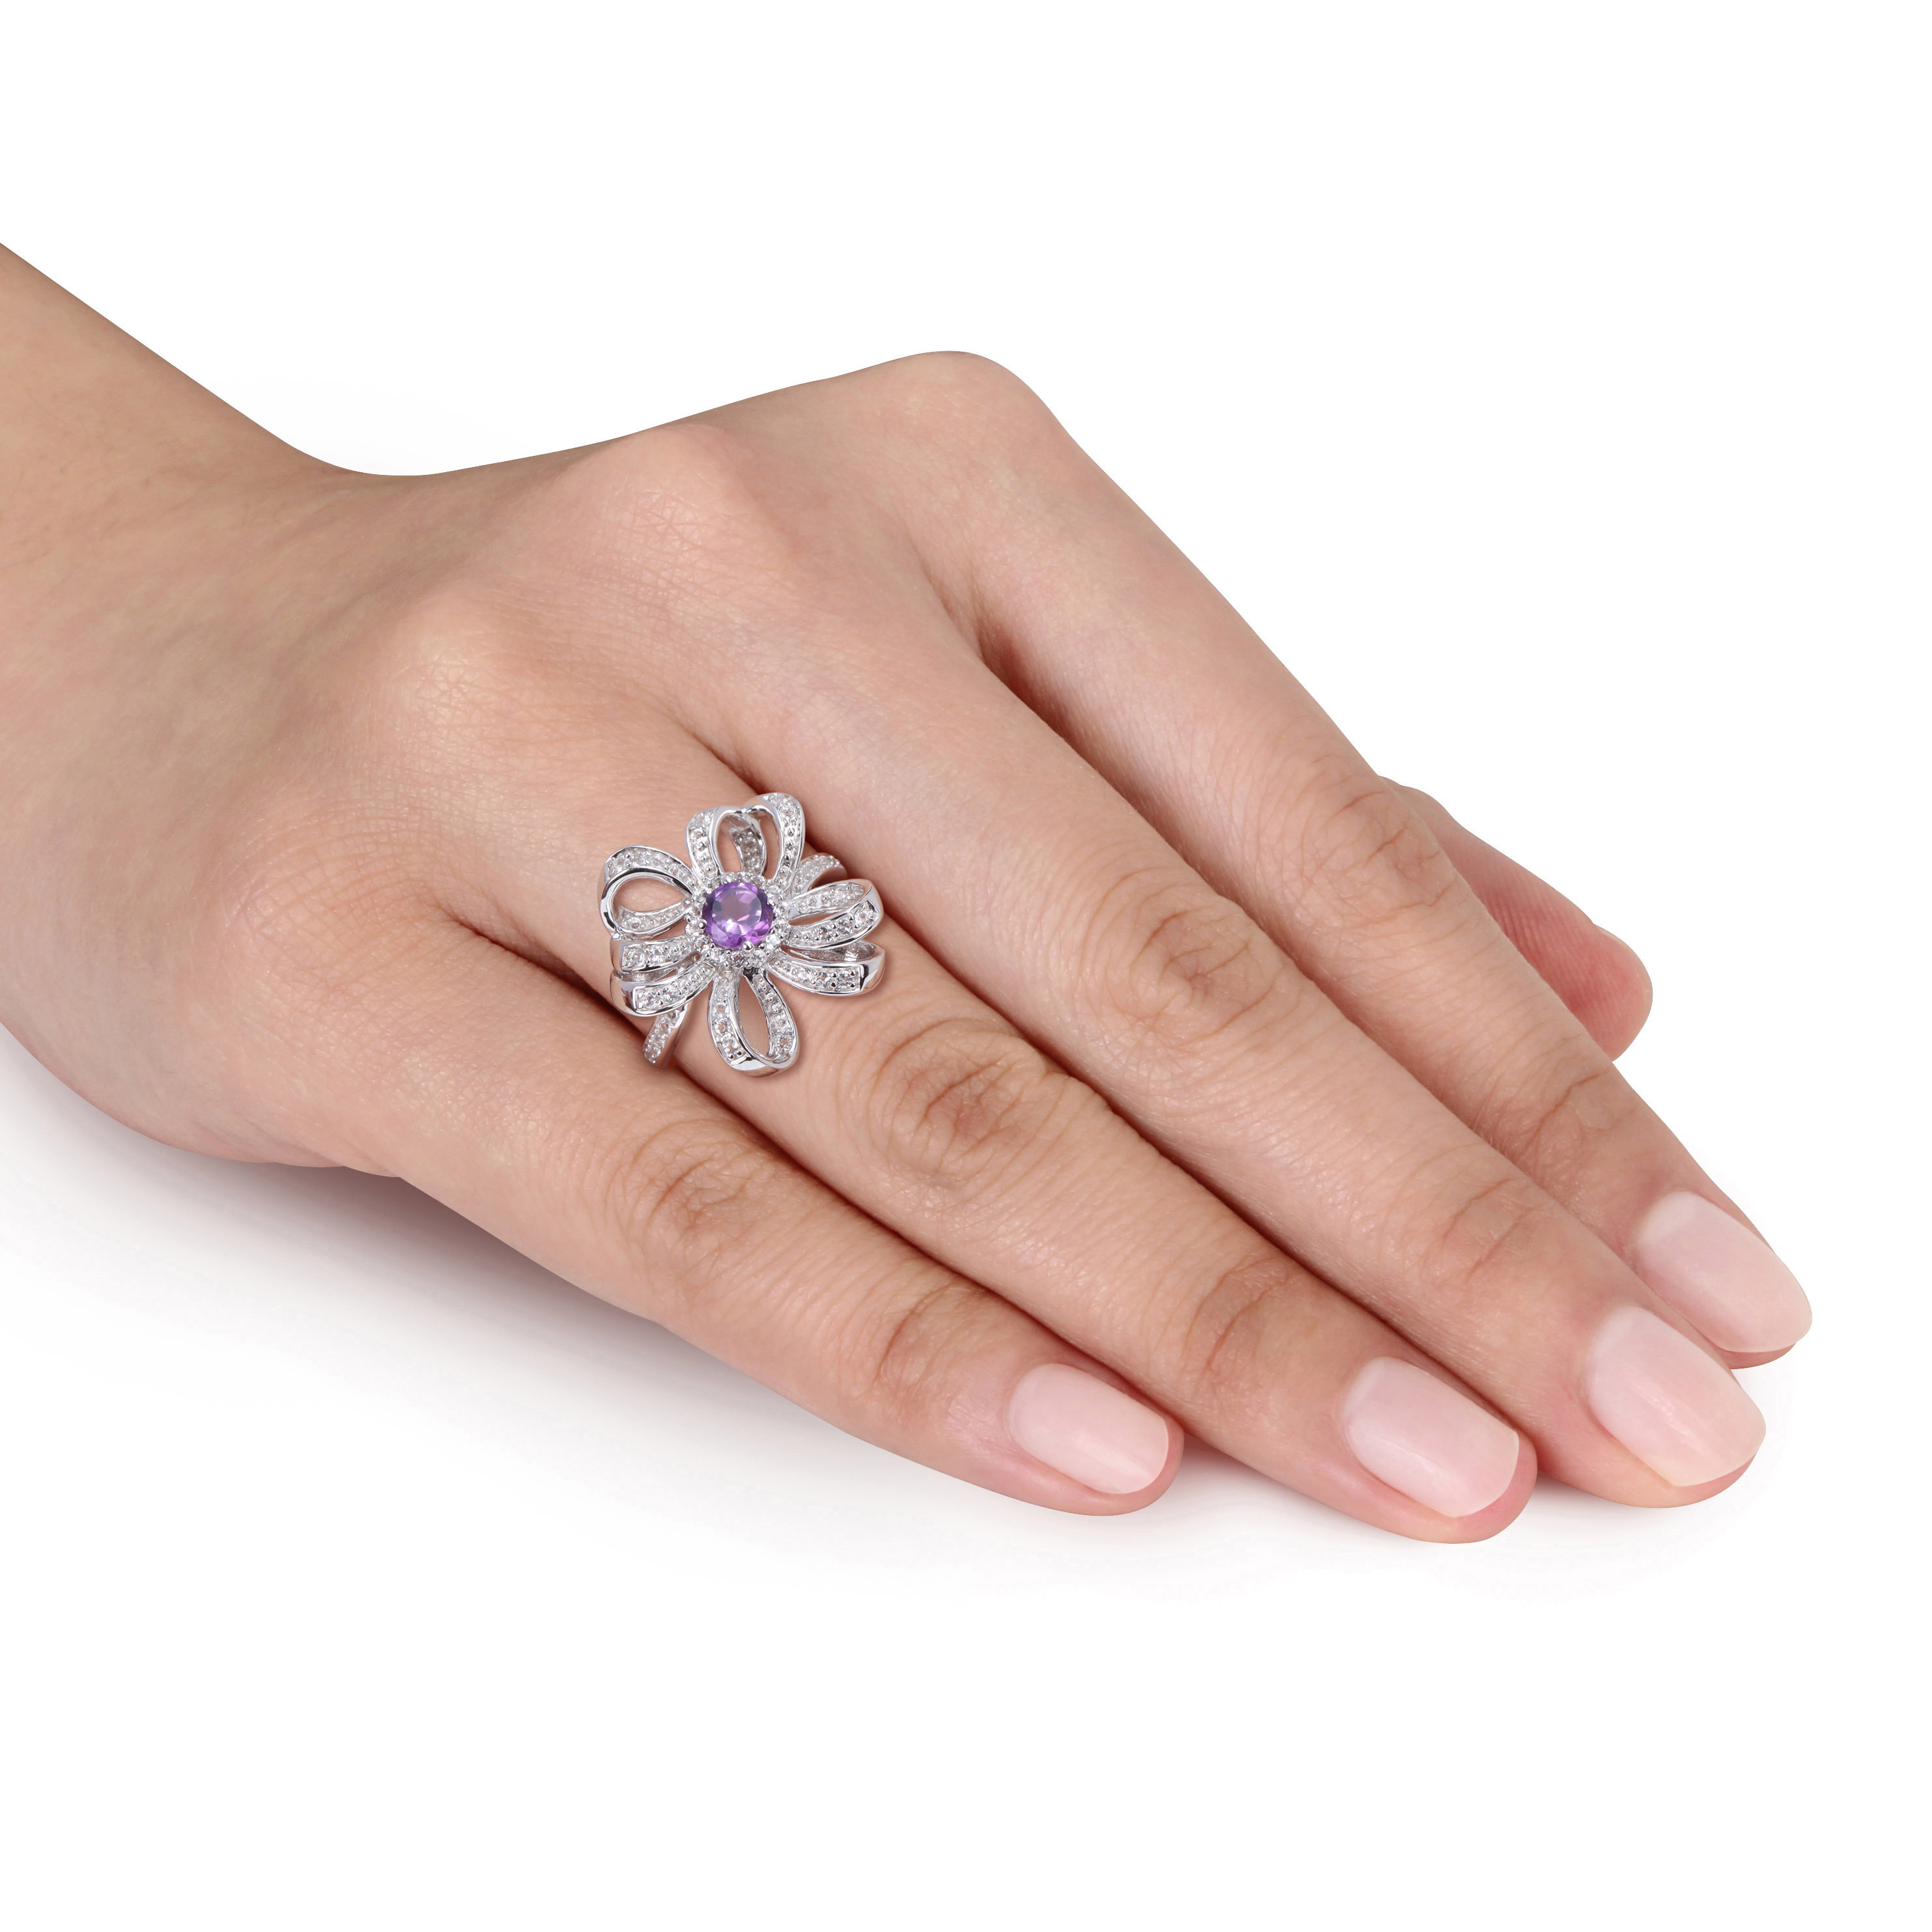 7/8 CT TGW African Amethyst and White Topaz Flower Cocktail Ring in Sterling Silver